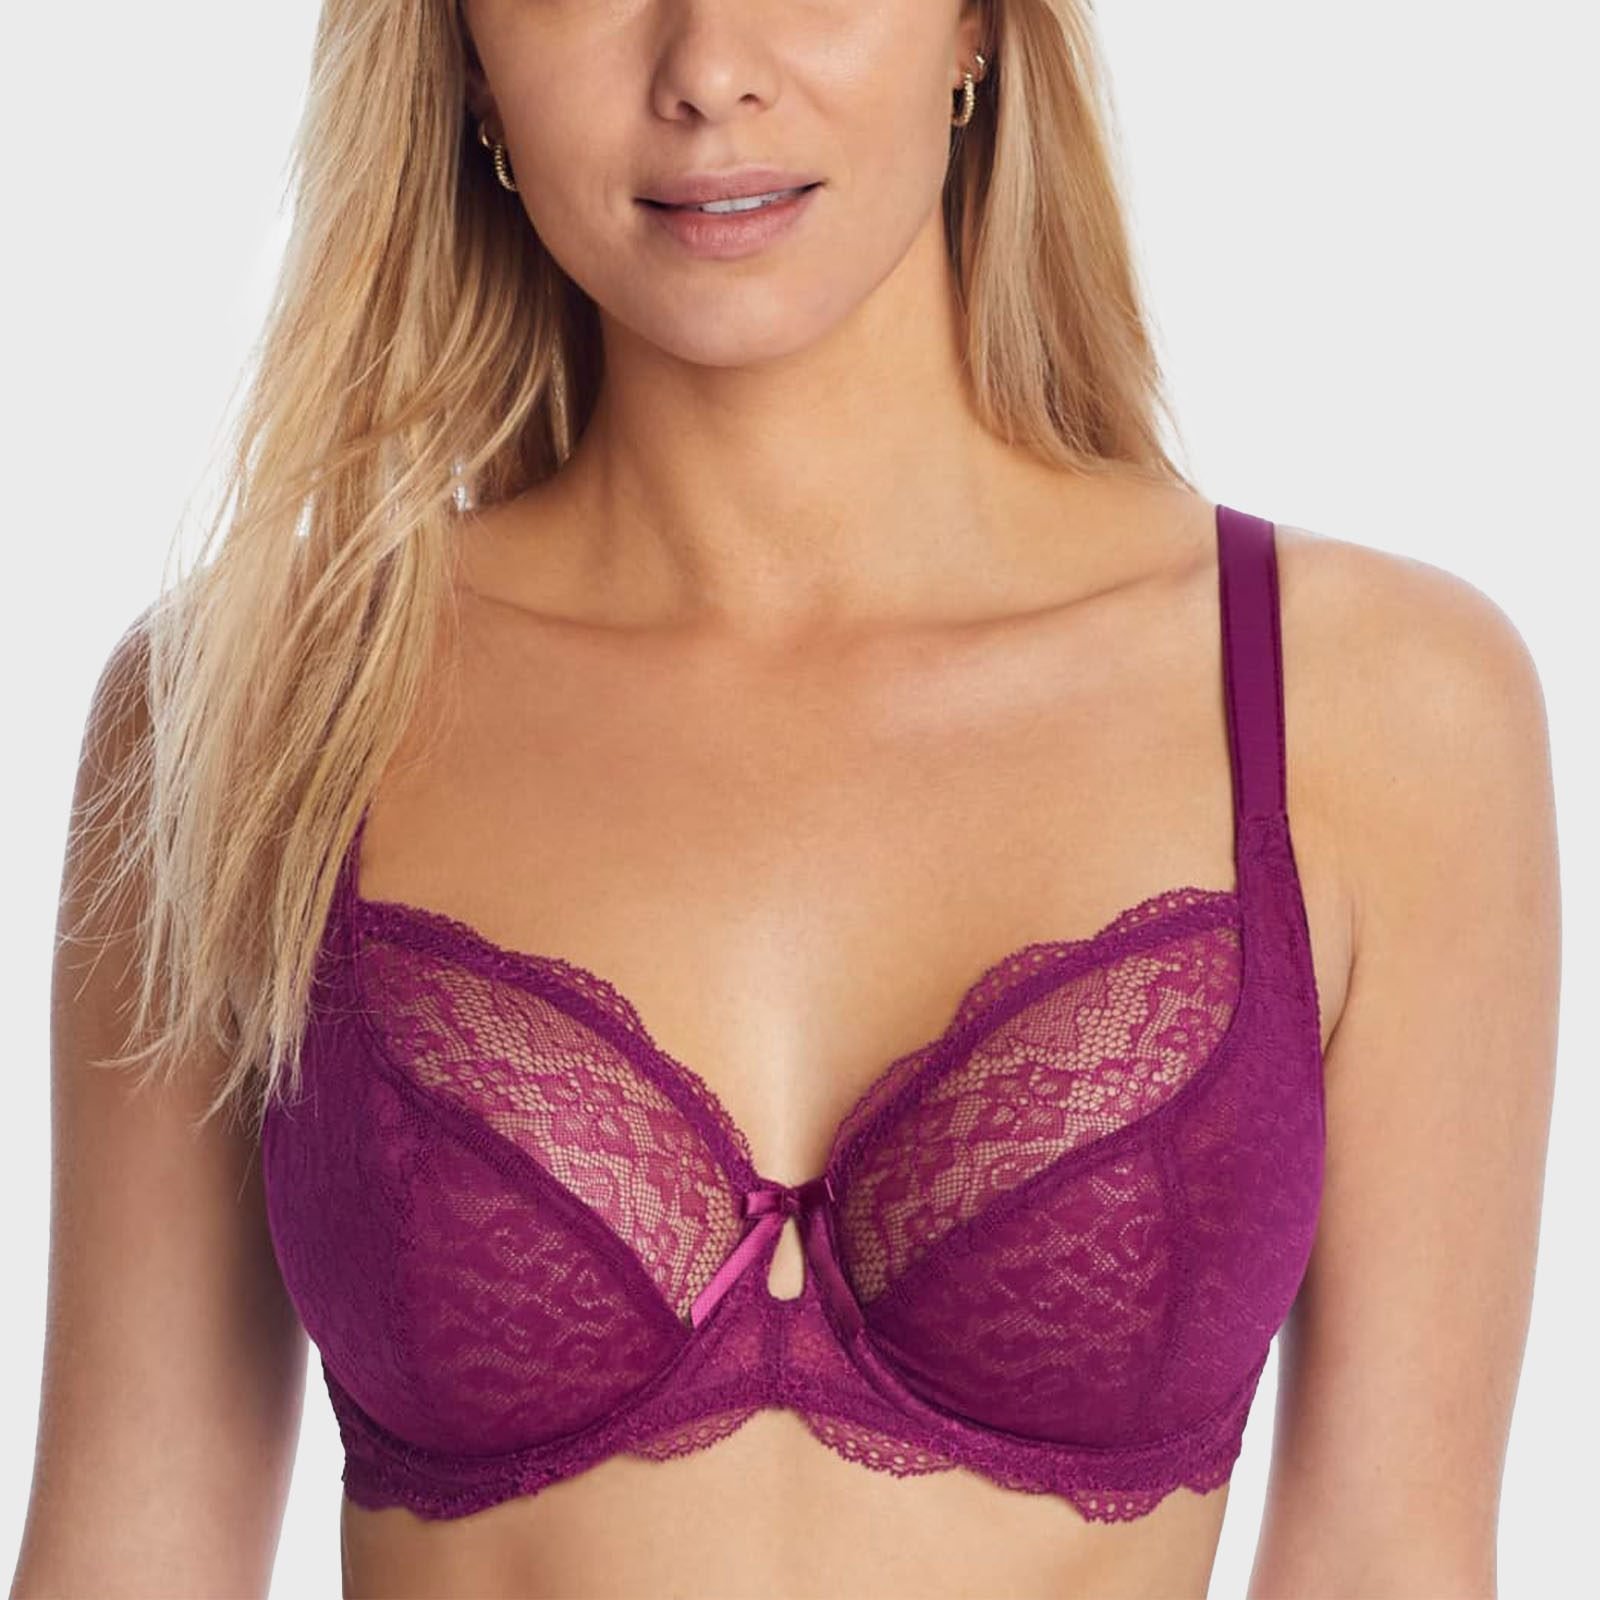 4 Ways To Make Your Padded Bra Look More Natural - ParfaitLingerie